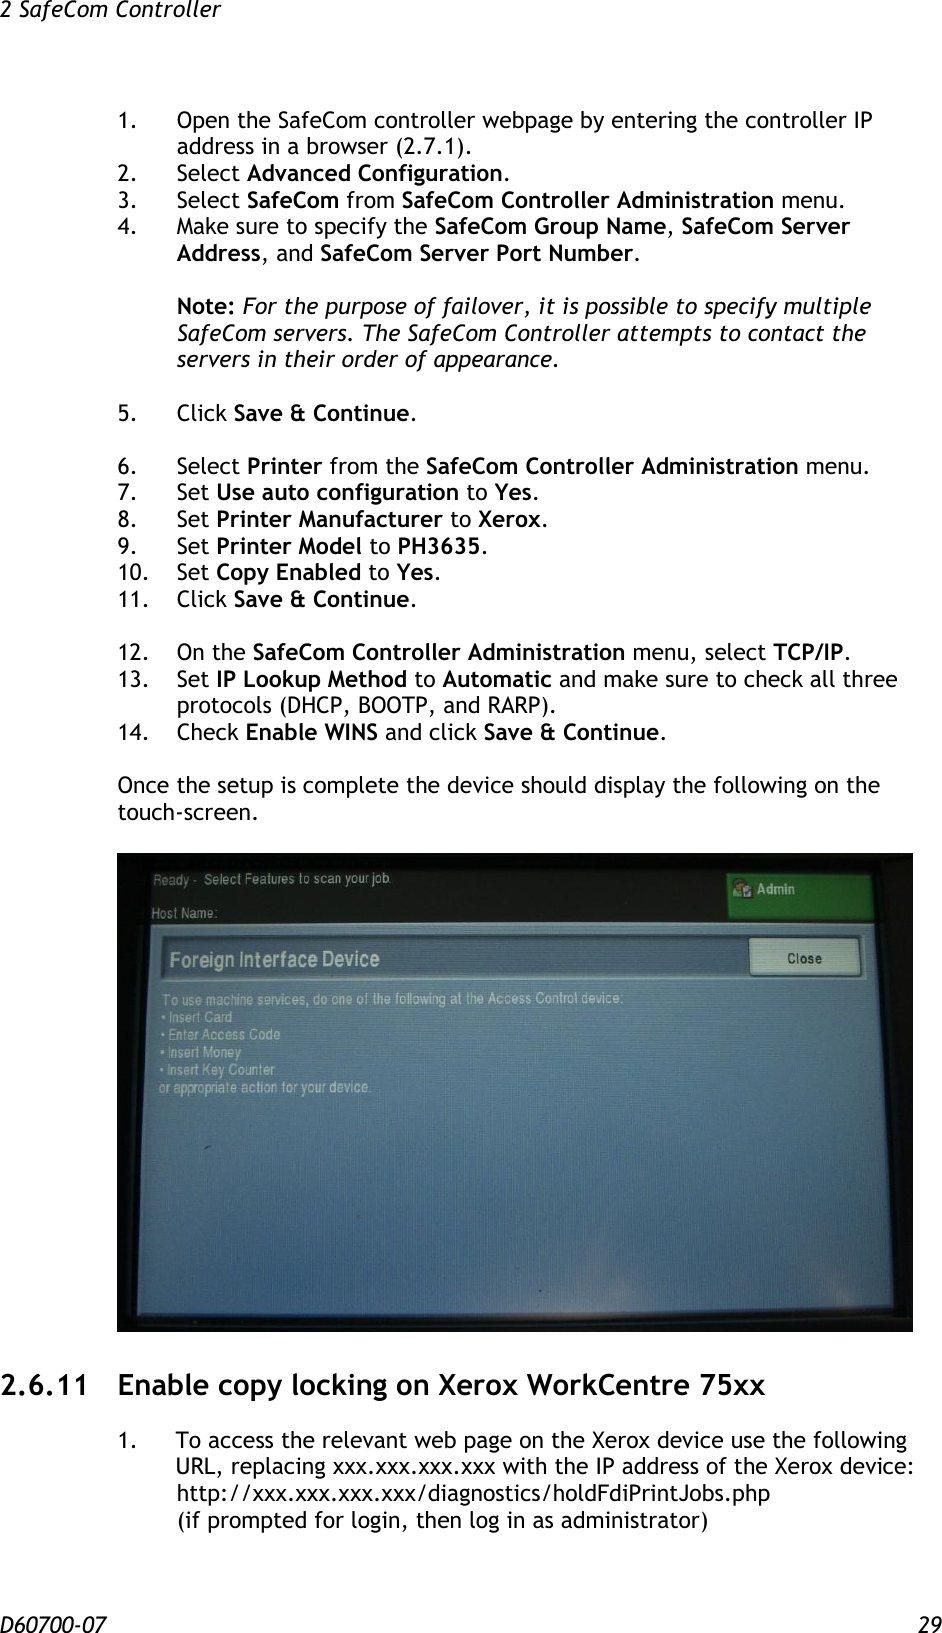 2 SafeCom Controller  D60700-07 29 1.  Open the SafeCom controller webpage by entering the controller IP address in a browser (2.7.1). 2.  Select Advanced Configuration. 3.  Select SafeCom from SafeCom Controller Administration menu.  4.  Make sure to specify the SafeCom Group Name, SafeCom Server Address, and SafeCom Server Port Number.    Note: For the purpose of failover, it is possible to specify multiple SafeCom servers. The SafeCom Controller attempts to contact the servers in their order of appearance.  5.  Click Save &amp; Continue.  6.  Select Printer from the SafeCom Controller Administration menu. 7.  Set Use auto configuration to Yes. 8.  Set Printer Manufacturer to Xerox. 9.  Set Printer Model to PH3635. 10.  Set Copy Enabled to Yes. 11.  Click Save &amp; Continue.  12.   On the SafeCom Controller Administration menu, select TCP/IP. 13.  Set IP Lookup Method to Automatic and make sure to check all three protocols (DHCP, BOOTP, and RARP).   14.  Check Enable WINS and click Save &amp; Continue.  Once the setup is complete the device should display the following on the touch-screen.   2.6.11 Enable copy locking on Xerox WorkCentre 75xx 1.  To access the relevant web page on the Xerox device use the following URL, replacing xxx.xxx.xxx.xxx with the IP address of the Xerox device:    http://xxx.xxx.xxx.xxx/diagnostics/holdFdiPrintJobs.php   (if prompted for login, then log in as administrator)  